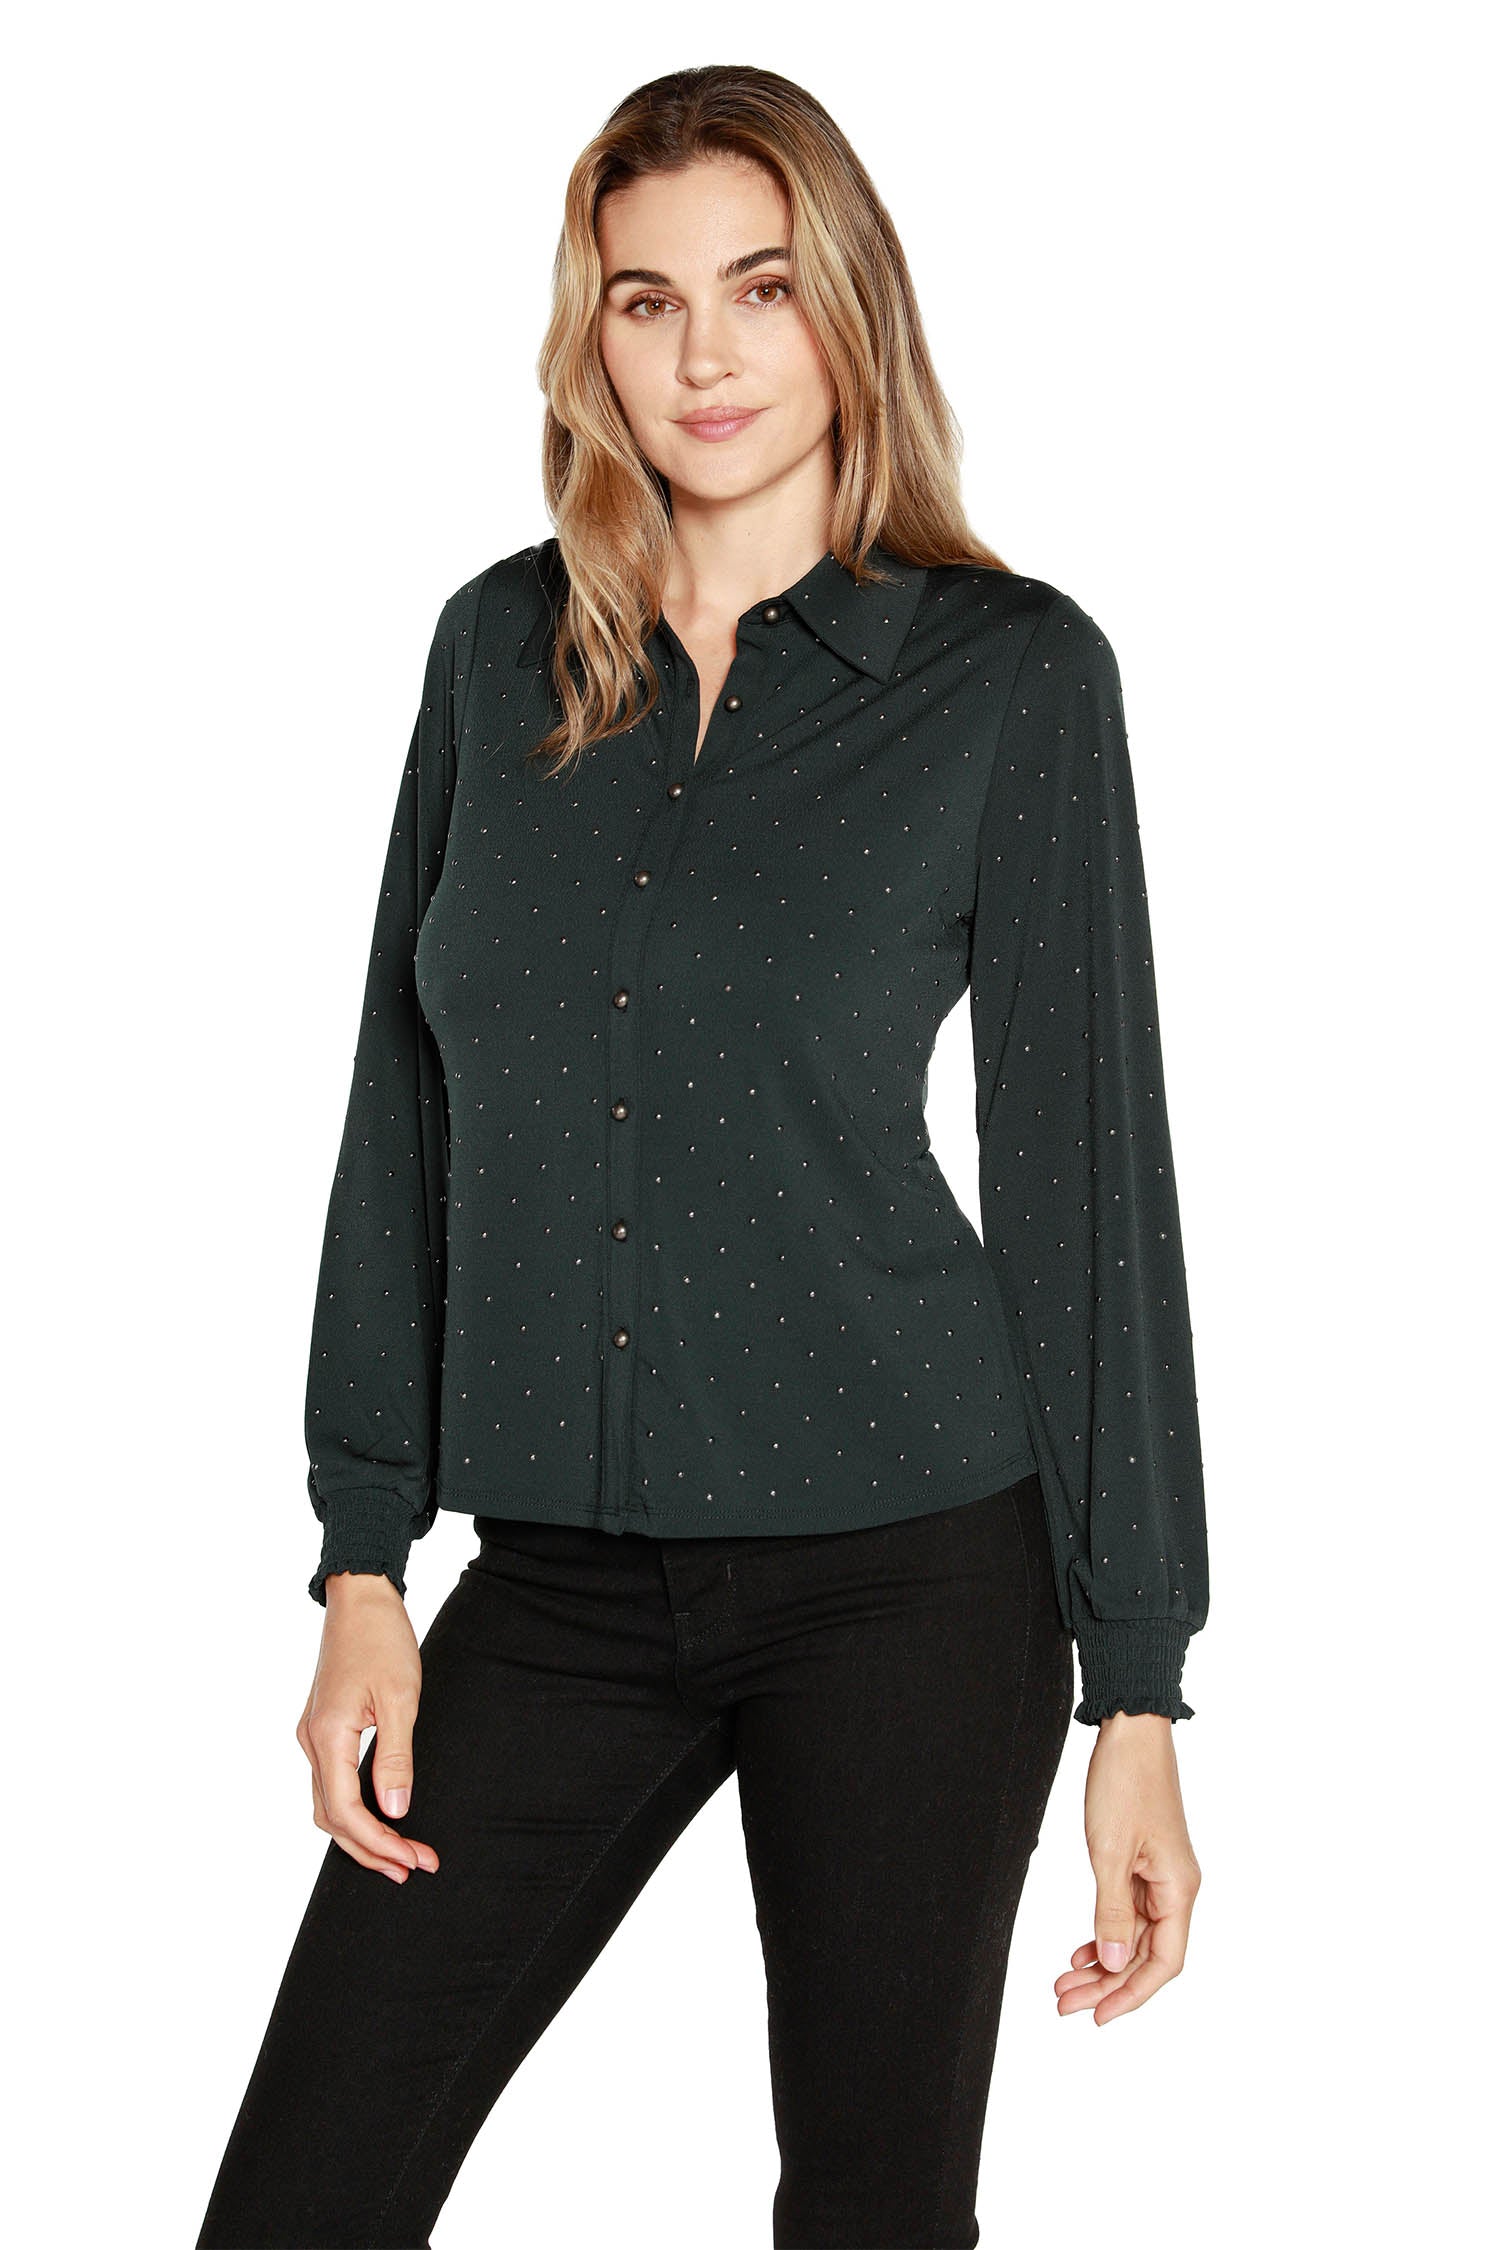 Women's Button Front Blouse with Long Blouson Sleeves in a Metallic Gel Print Jersey